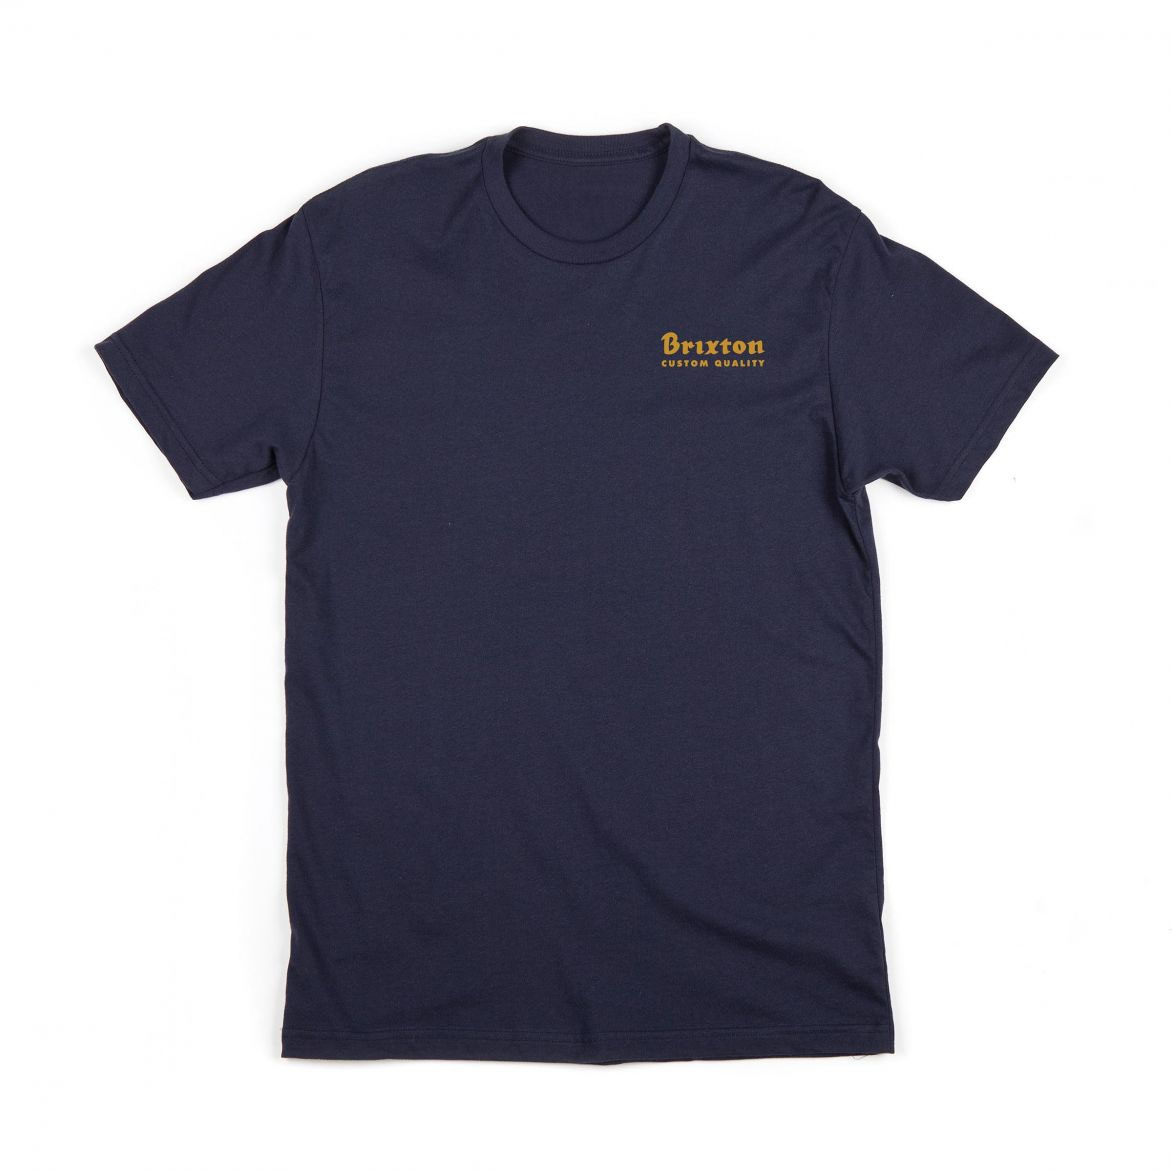 Crowich Shirt by Brixton- NAVY (Sale price!)